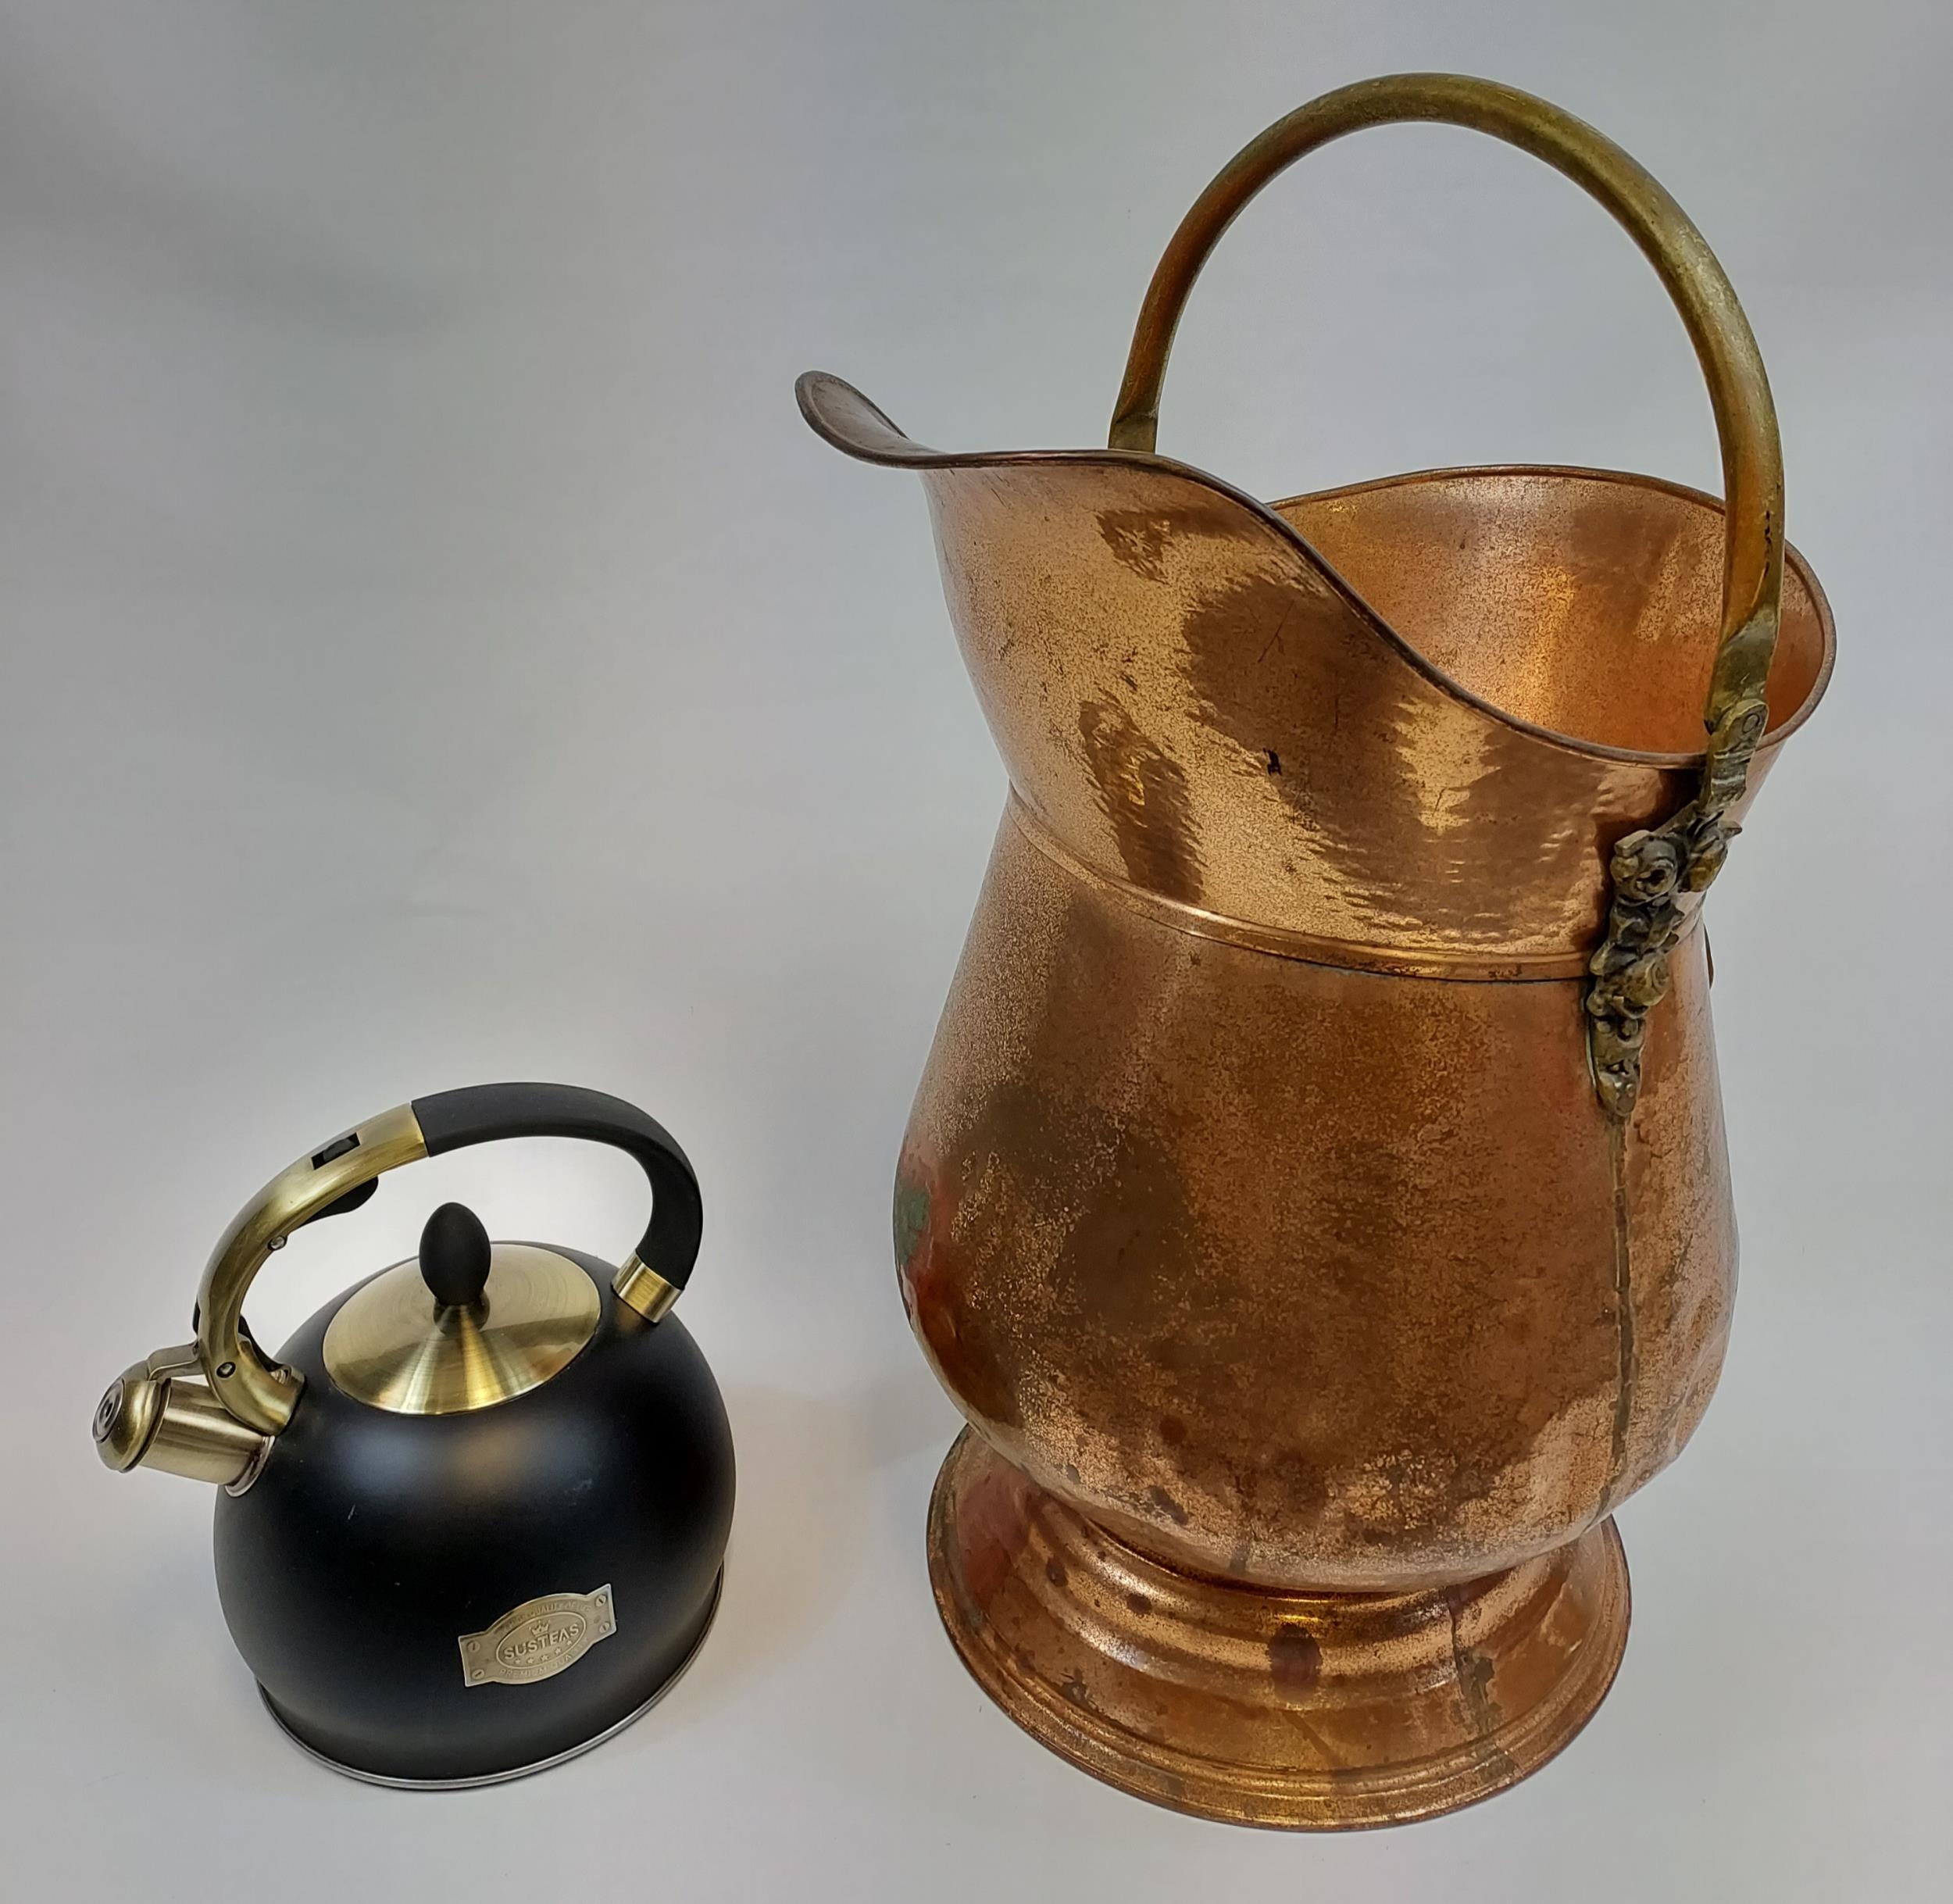 A Vintage brass and copper coal scuttle and Susteas stove top whistling tea kettle.